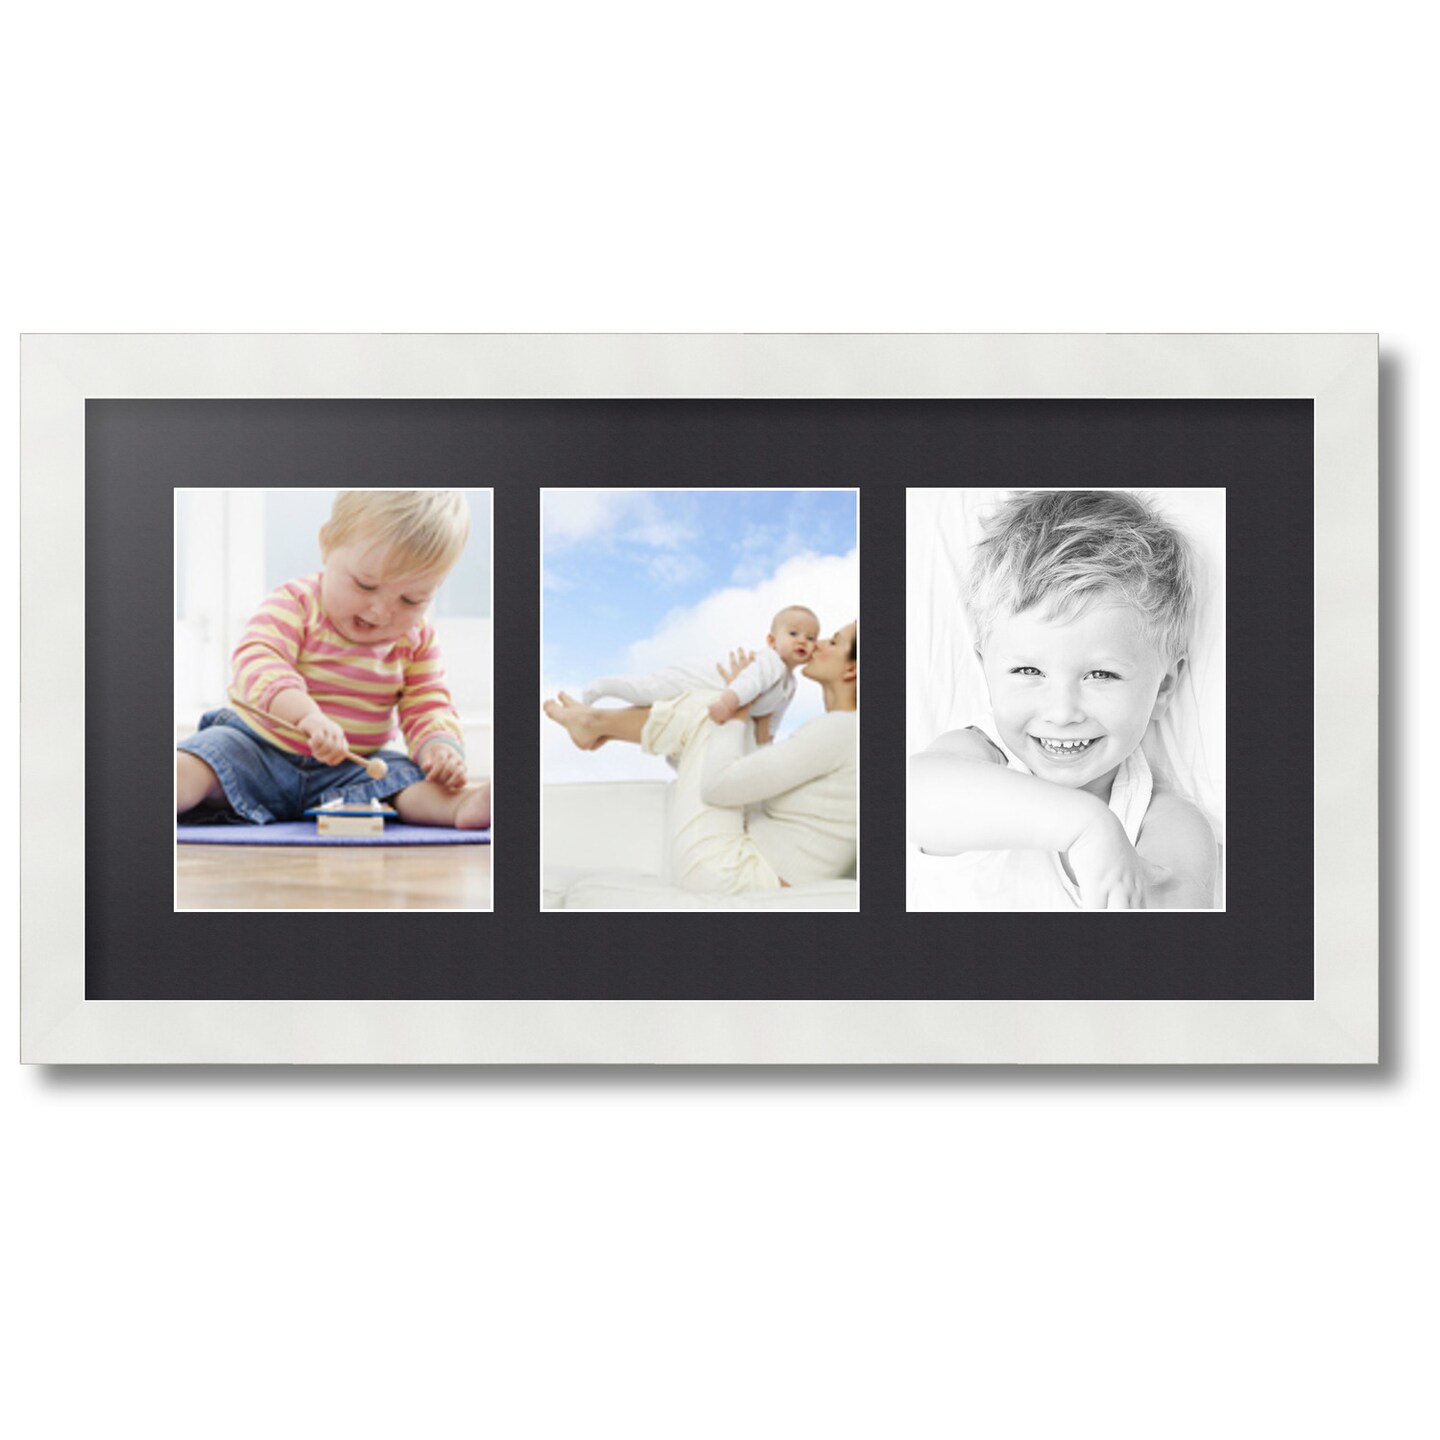 ArtToFrames Collage Photo Picture Frame with 3 - 6x8 inch Openings, Framed in White with Over 62 Mat Color Options and Plexi Glass (CSM-3966-782)